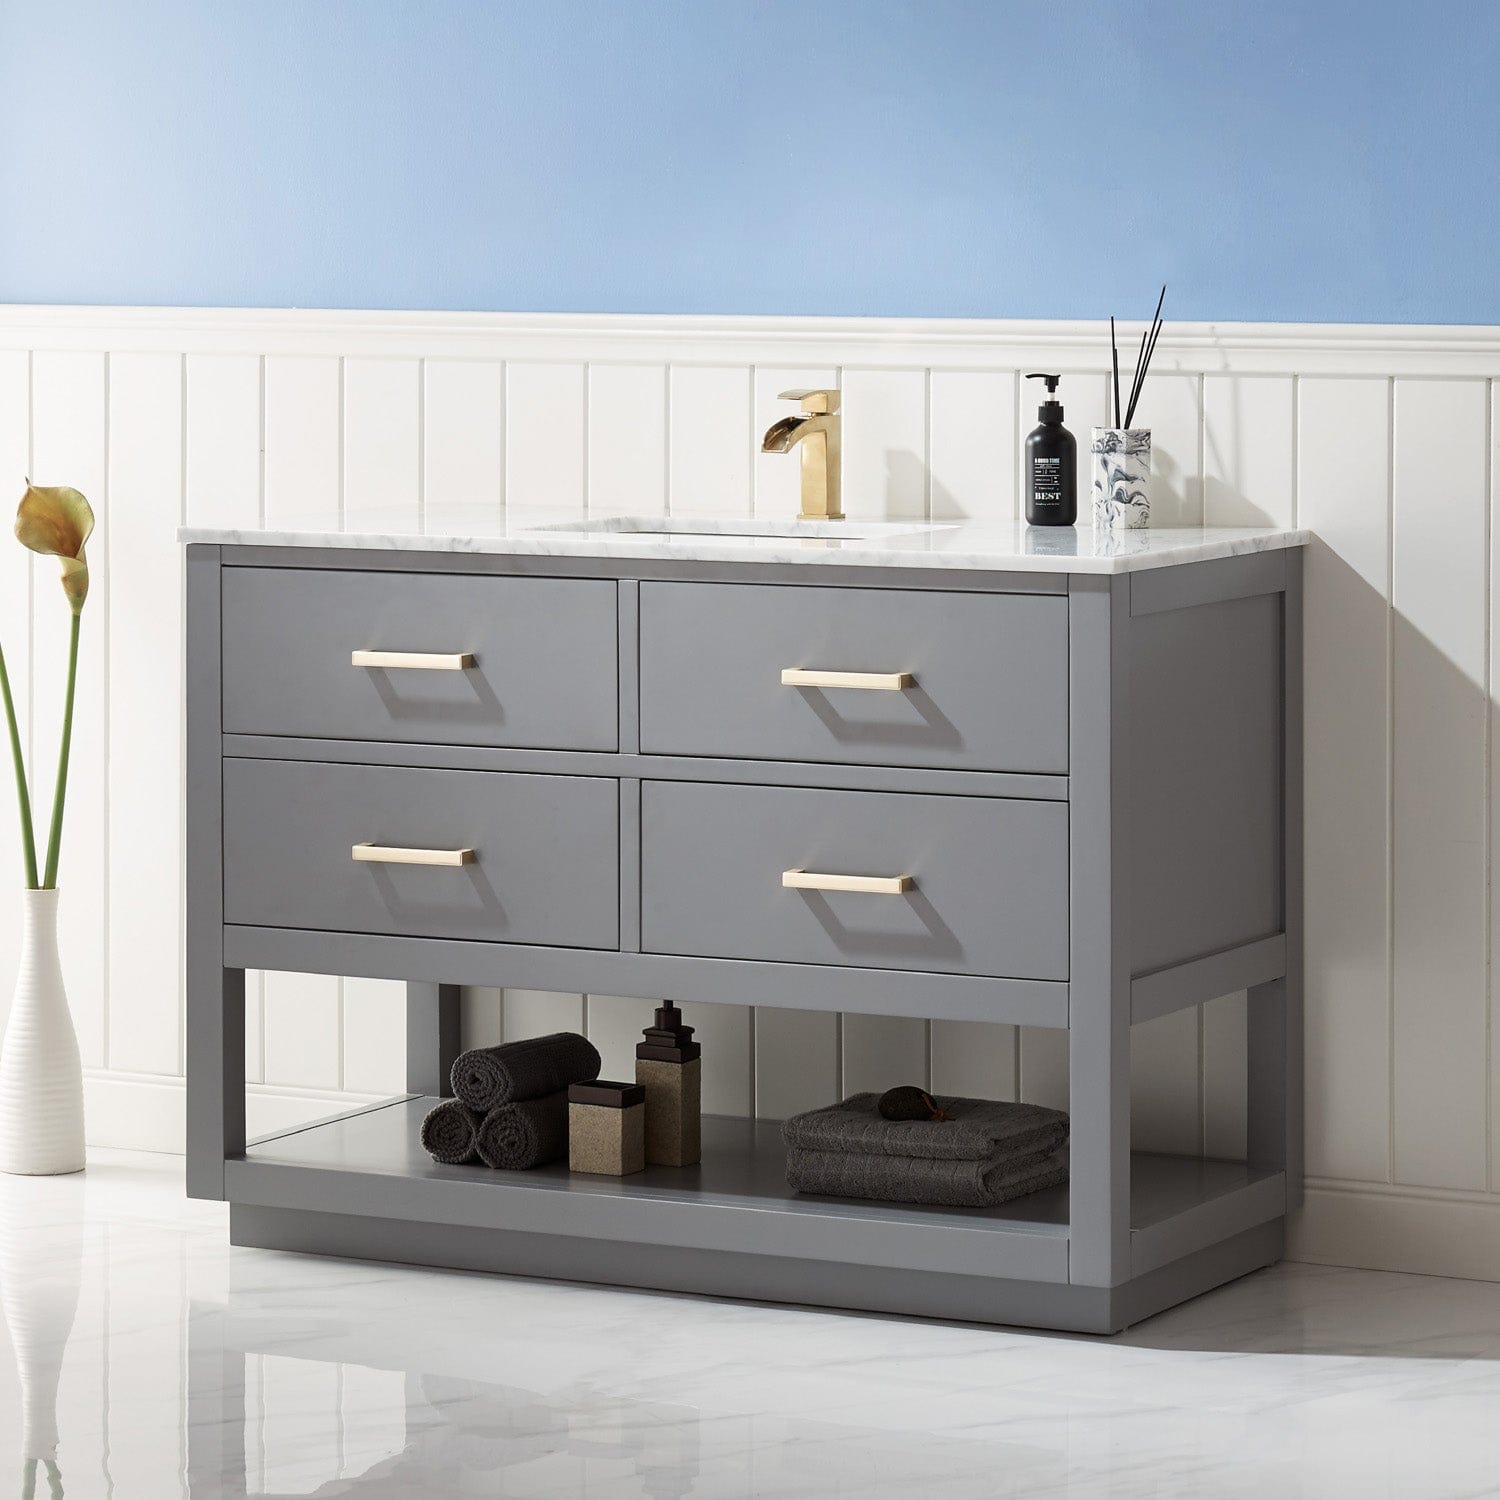 Altair Remi 48" Single Bathroom Vanity Set in Gray and Carrara White Marble Countertop without Mirror 532048-GR-CA-NM - Molaix631112971461Vanity532048-GR-CA-NM